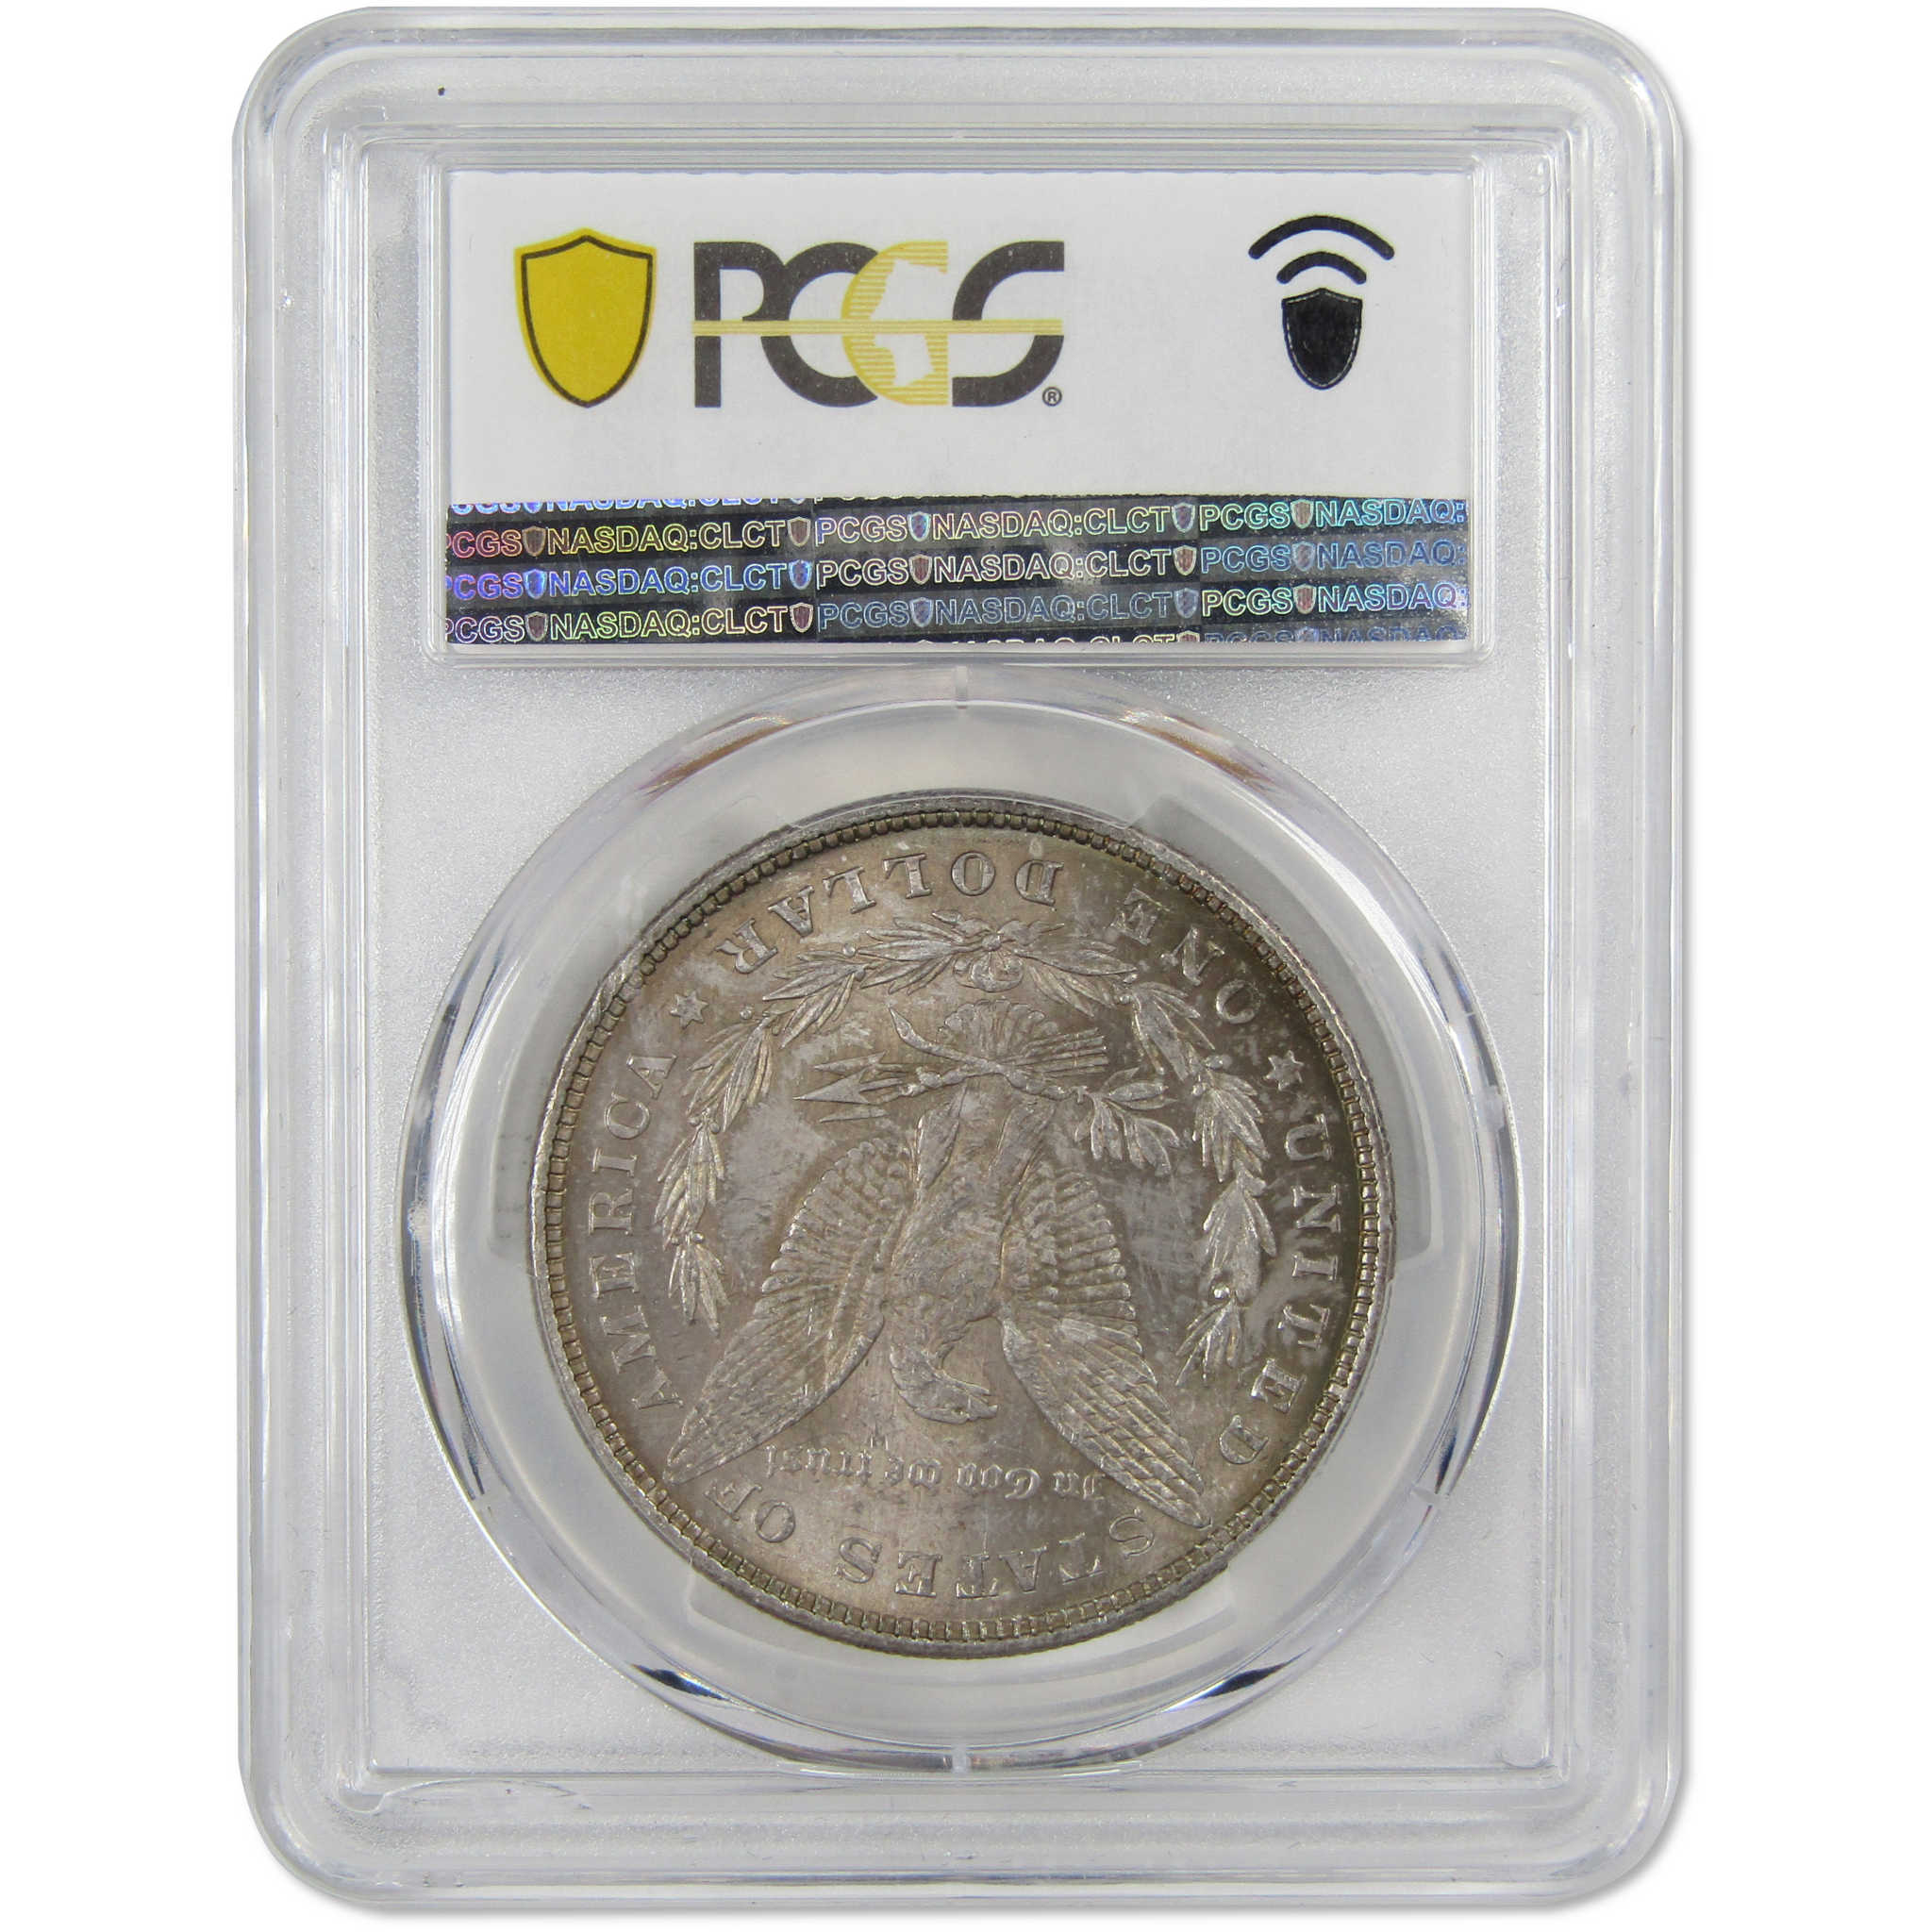 1878 8TF Morgan Dollar MS 62 PCGS 90% Silver Uncirculated SKU:I3846 - Morgan coin - Morgan silver dollar - Morgan silver dollar for sale - Profile Coins &amp; Collectibles